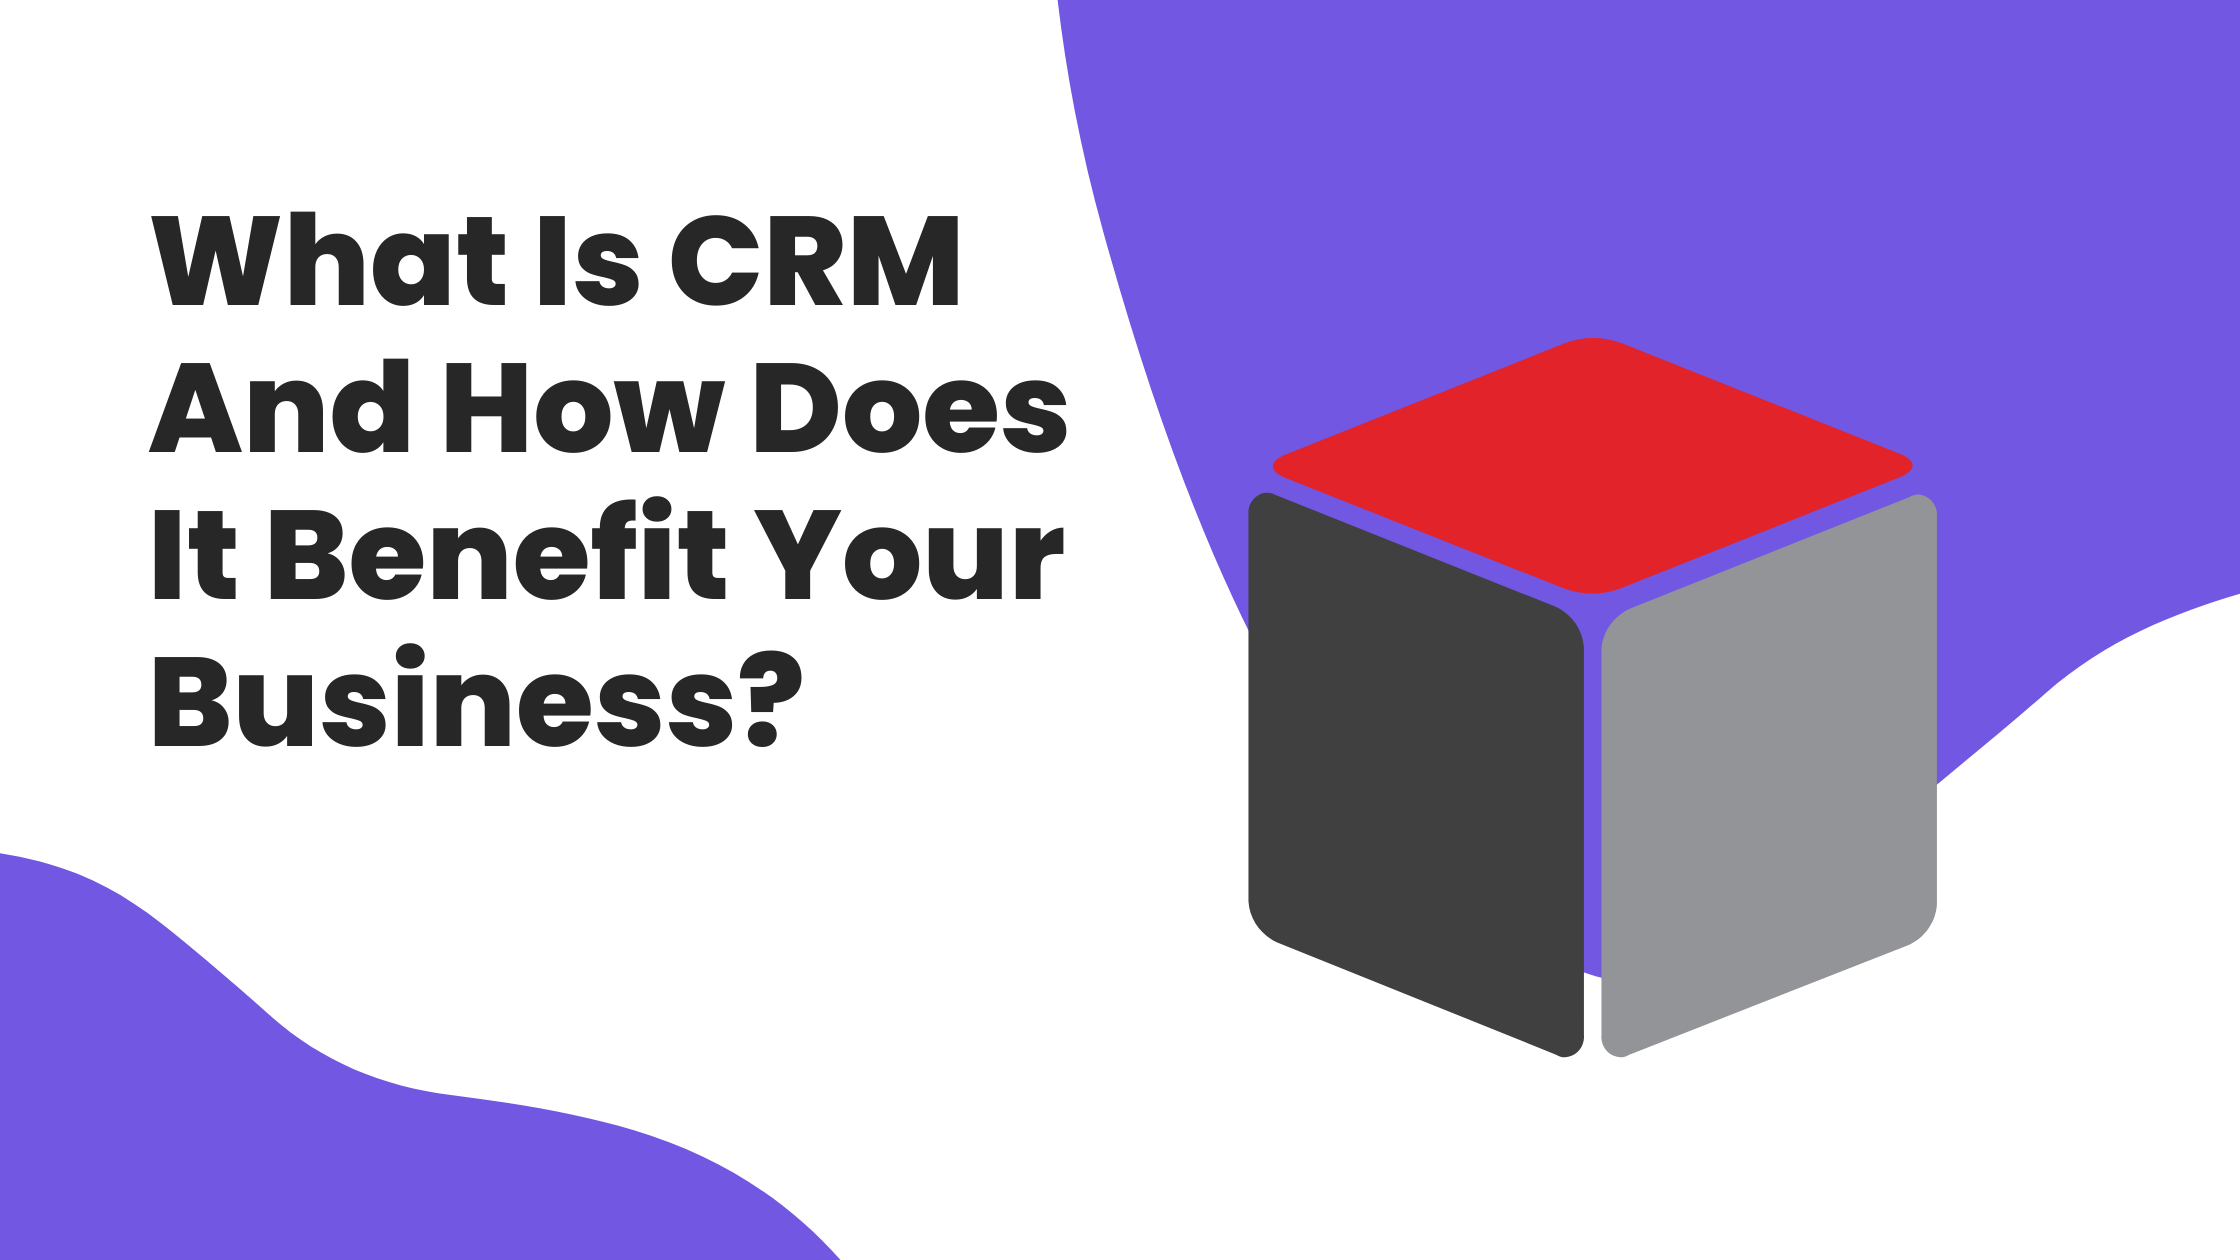 What Is CRM And How Does It Benefit Your Business